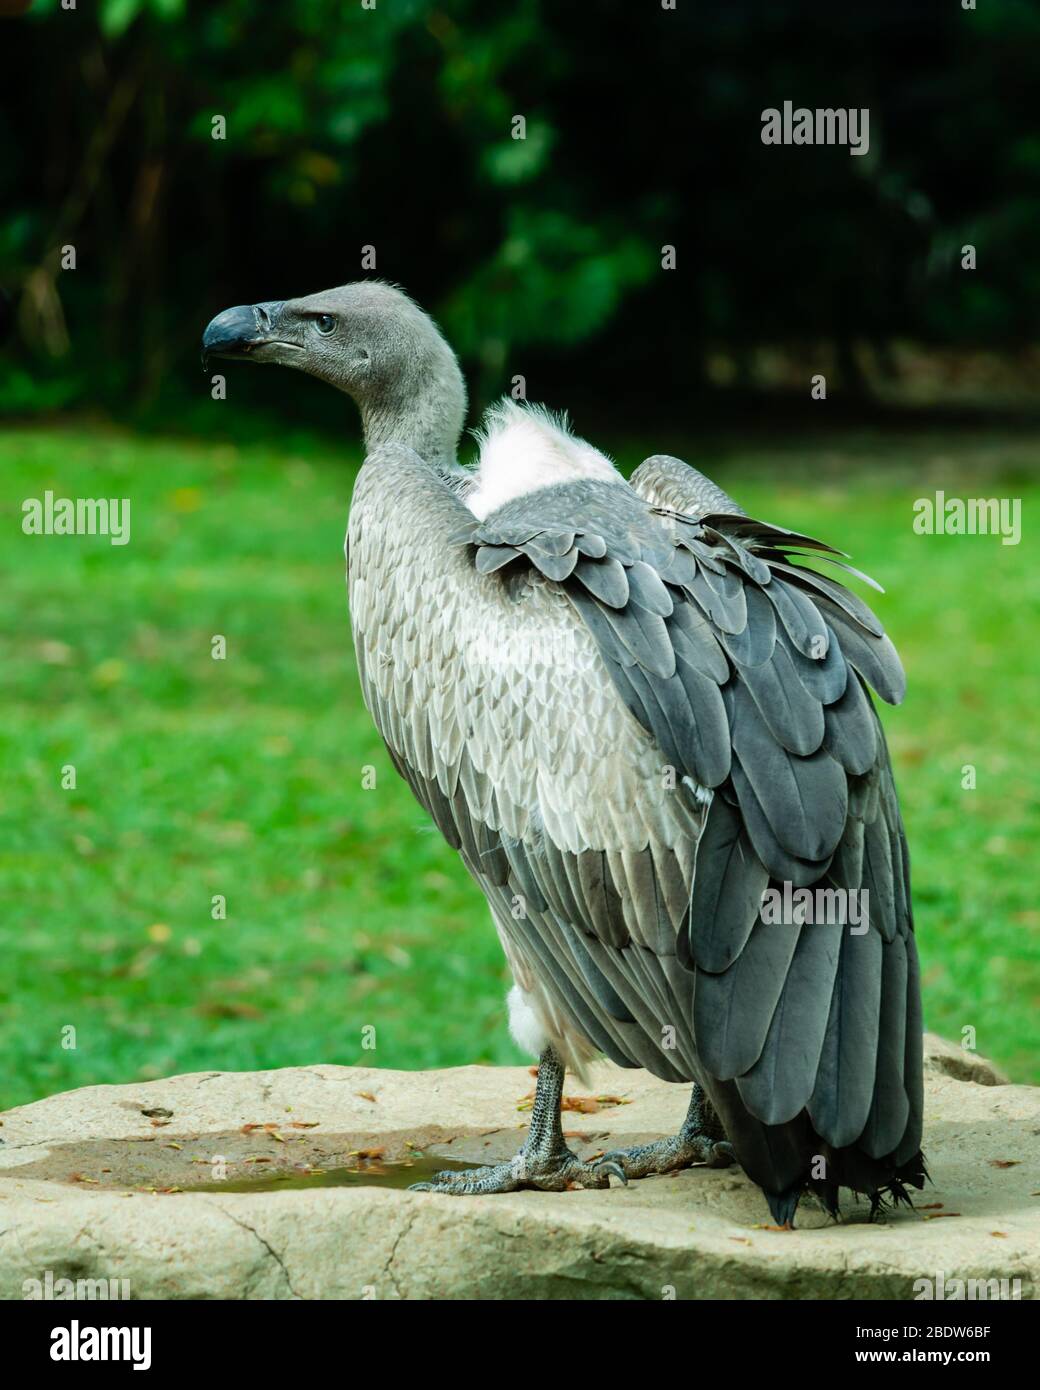 Eagles and Vulture bird sitting outdoor in park Stock Photo